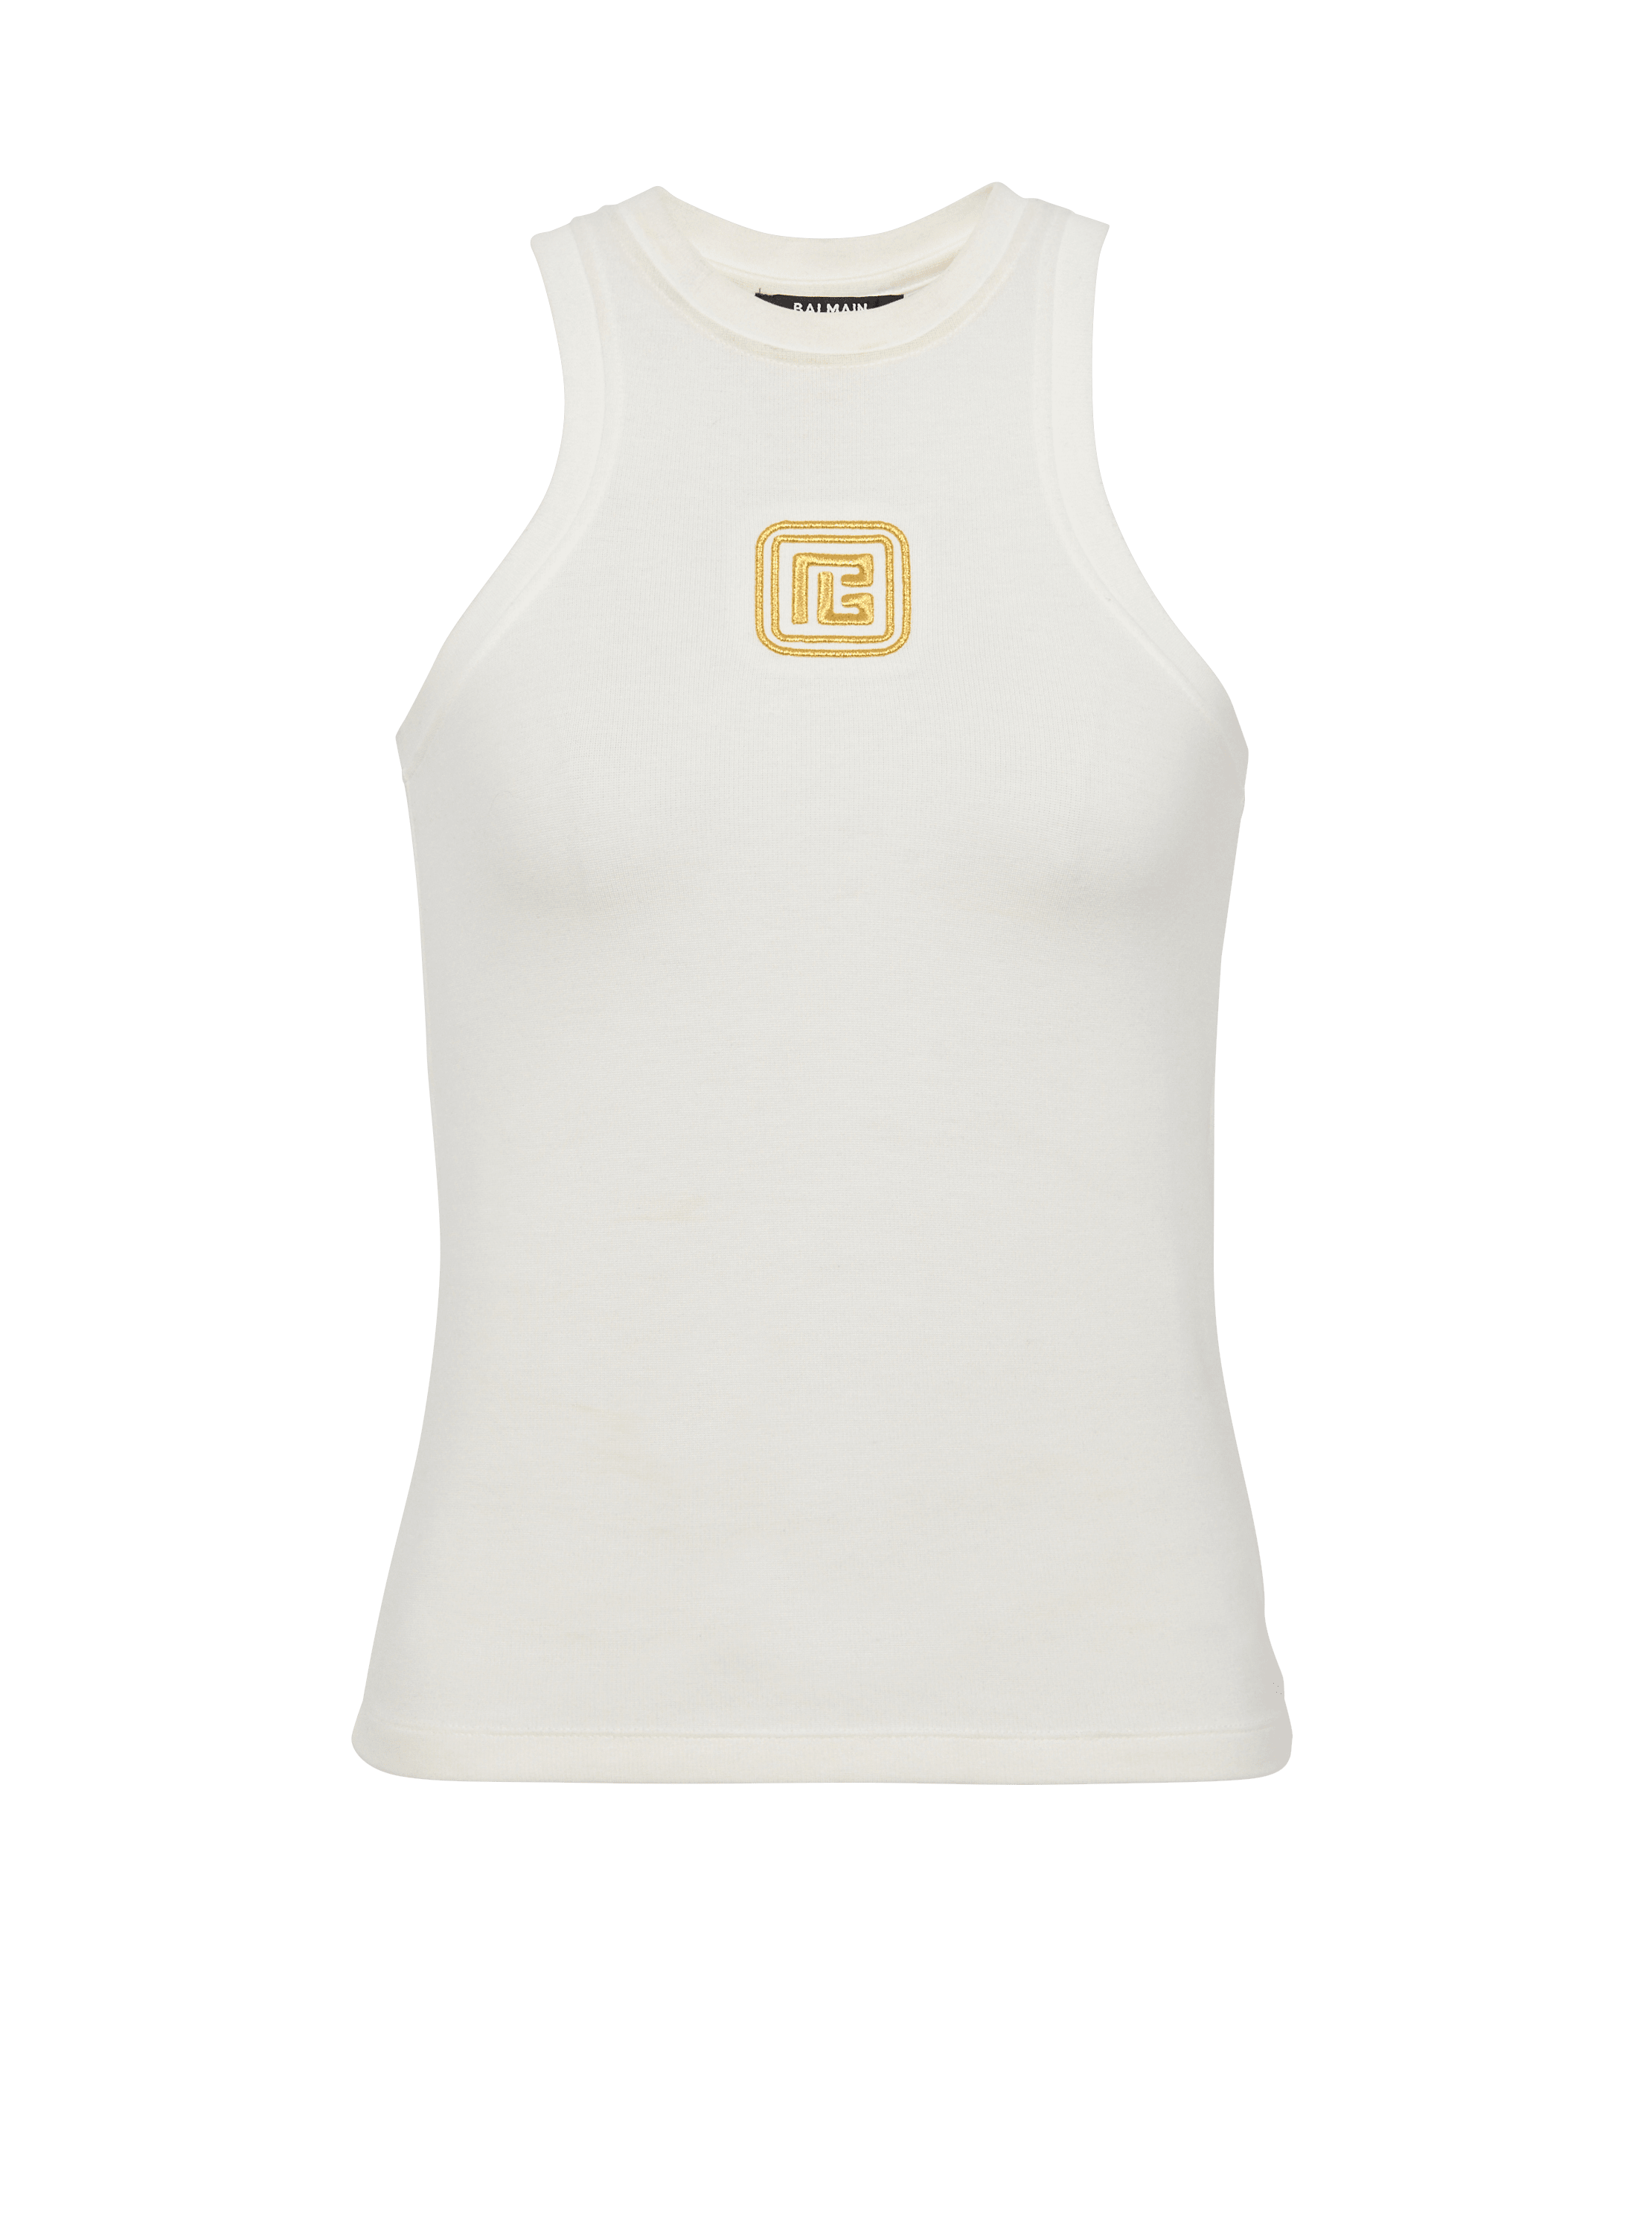 PB embroidered tank top, white, hi-res